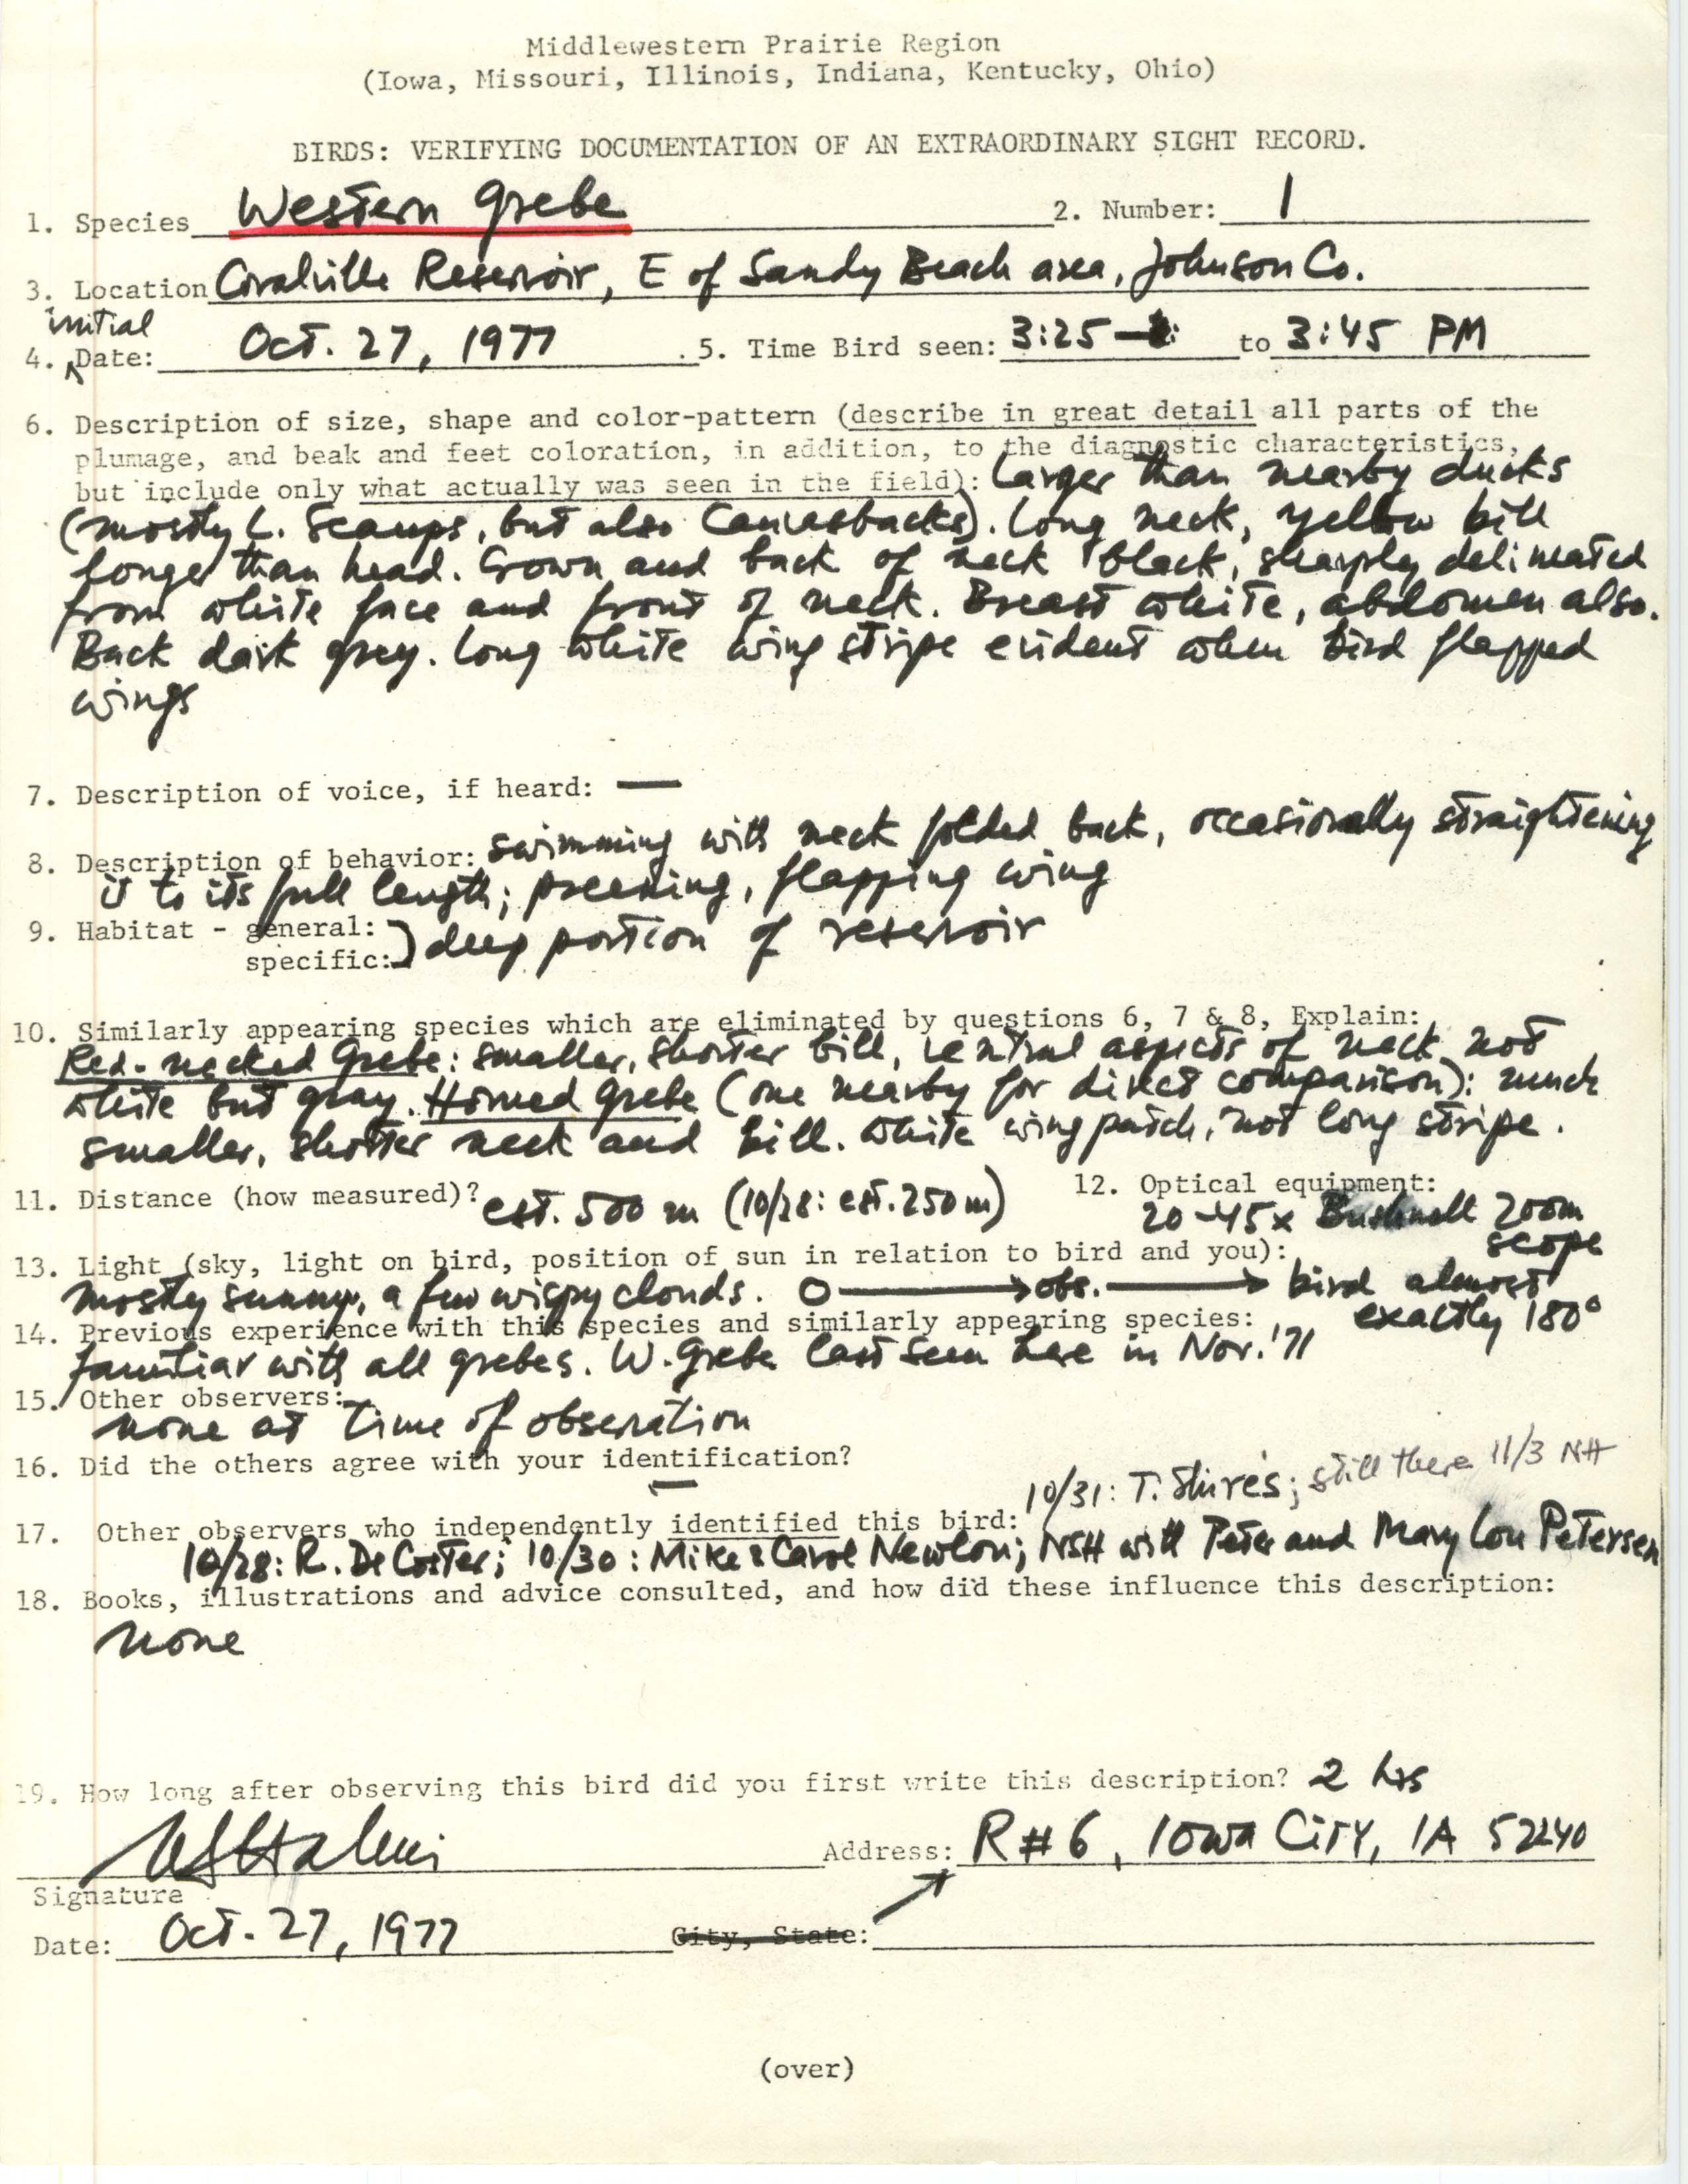 Rare bird documentation form for Western Grebe at Sandy Beach Area at Coralville Reservoir, 1977